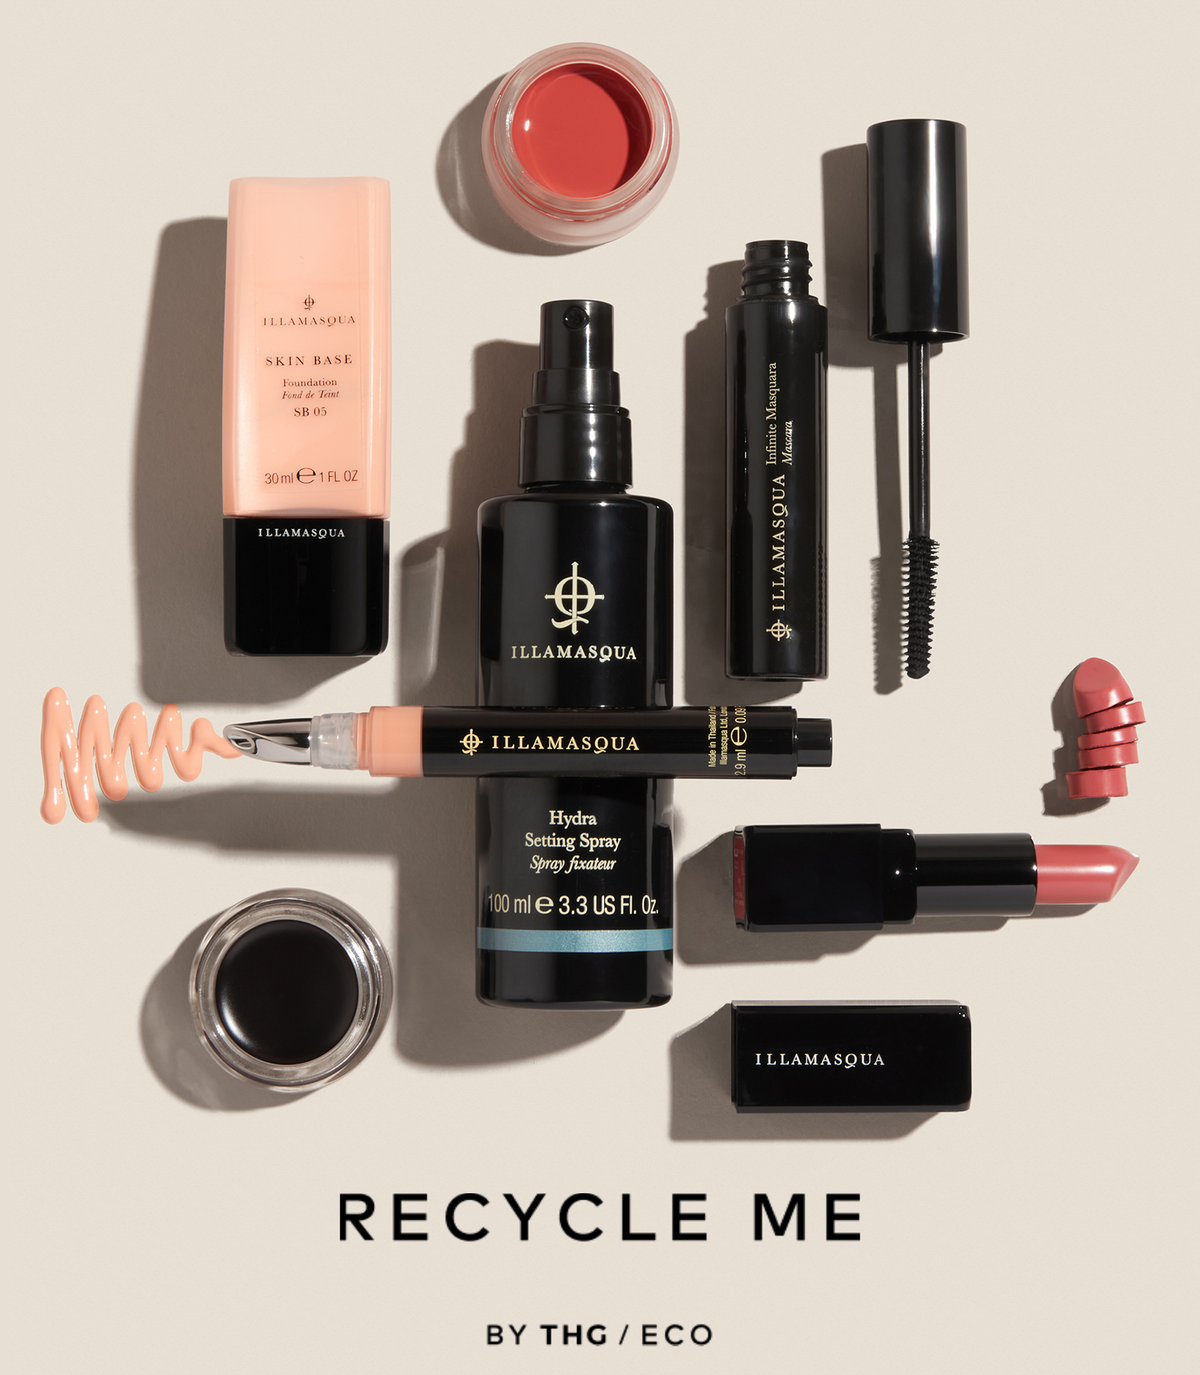 Recycle me by thg/Eco - RECYCLE YOUR EMPTY PLASTIC BEAUTY PRODUCTS WITH RECYCLE ME BY THG ECO. It's easy, it's free of charge, and we'll recycle all your empties, no matter what the brand.